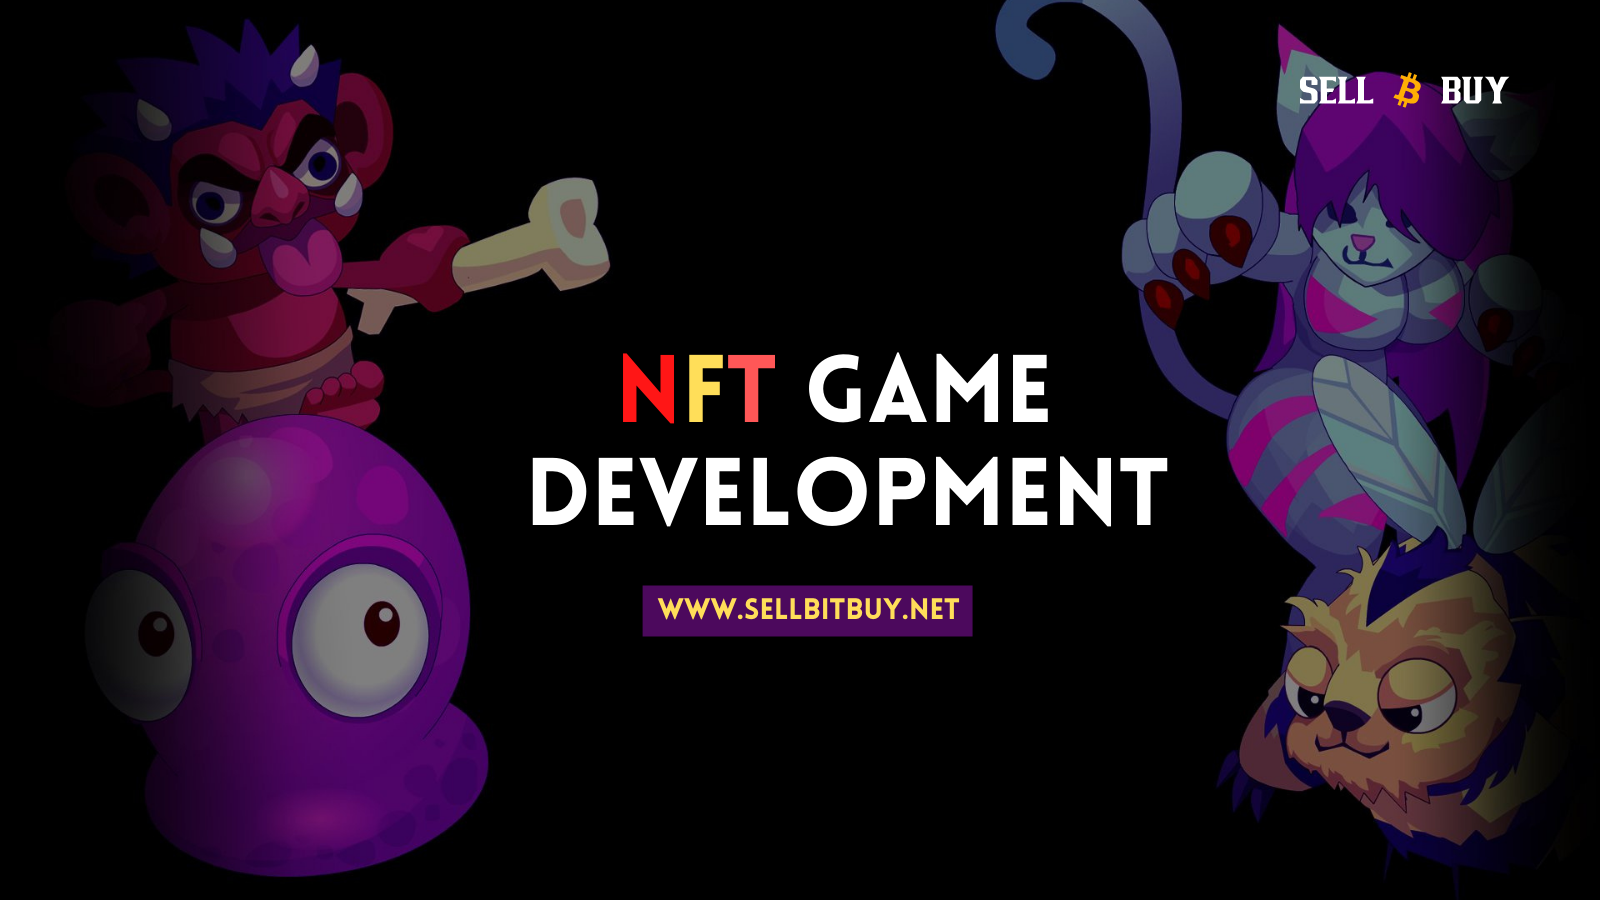 Article about How to build NFT Gaming Platform In Few Days